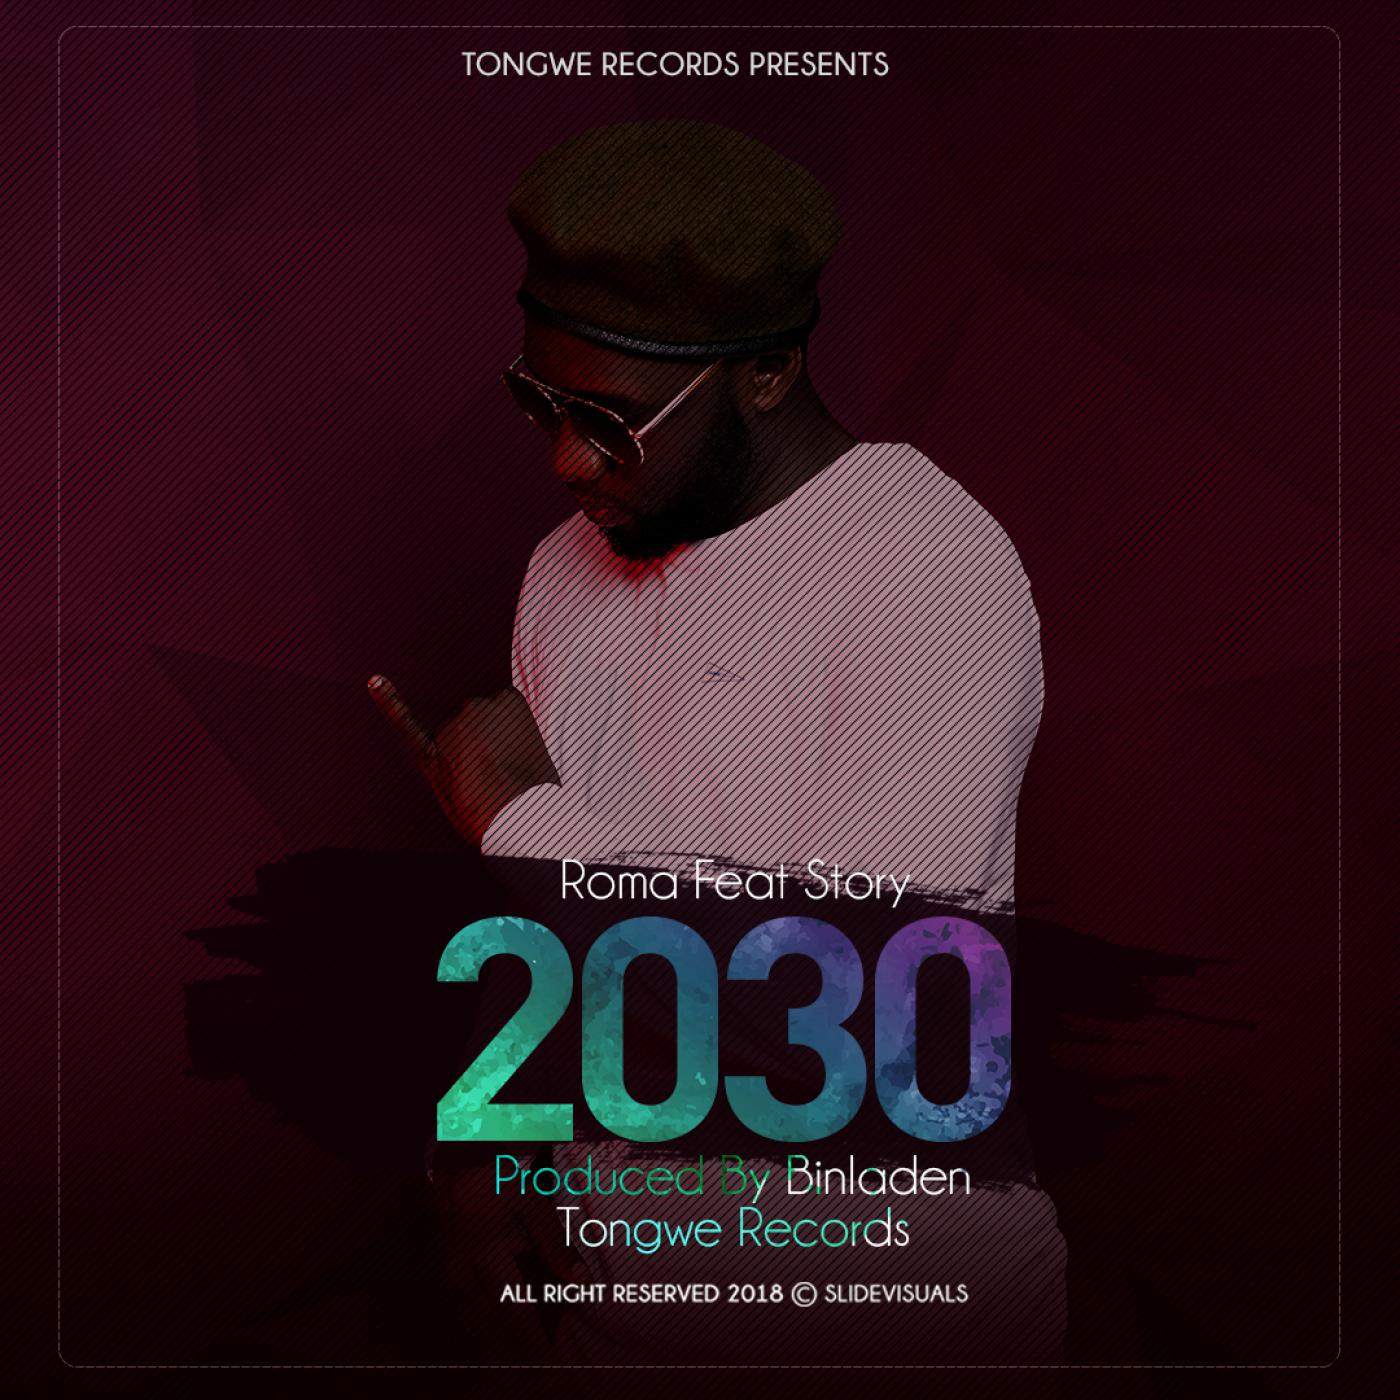 2030 (Feat. Story)